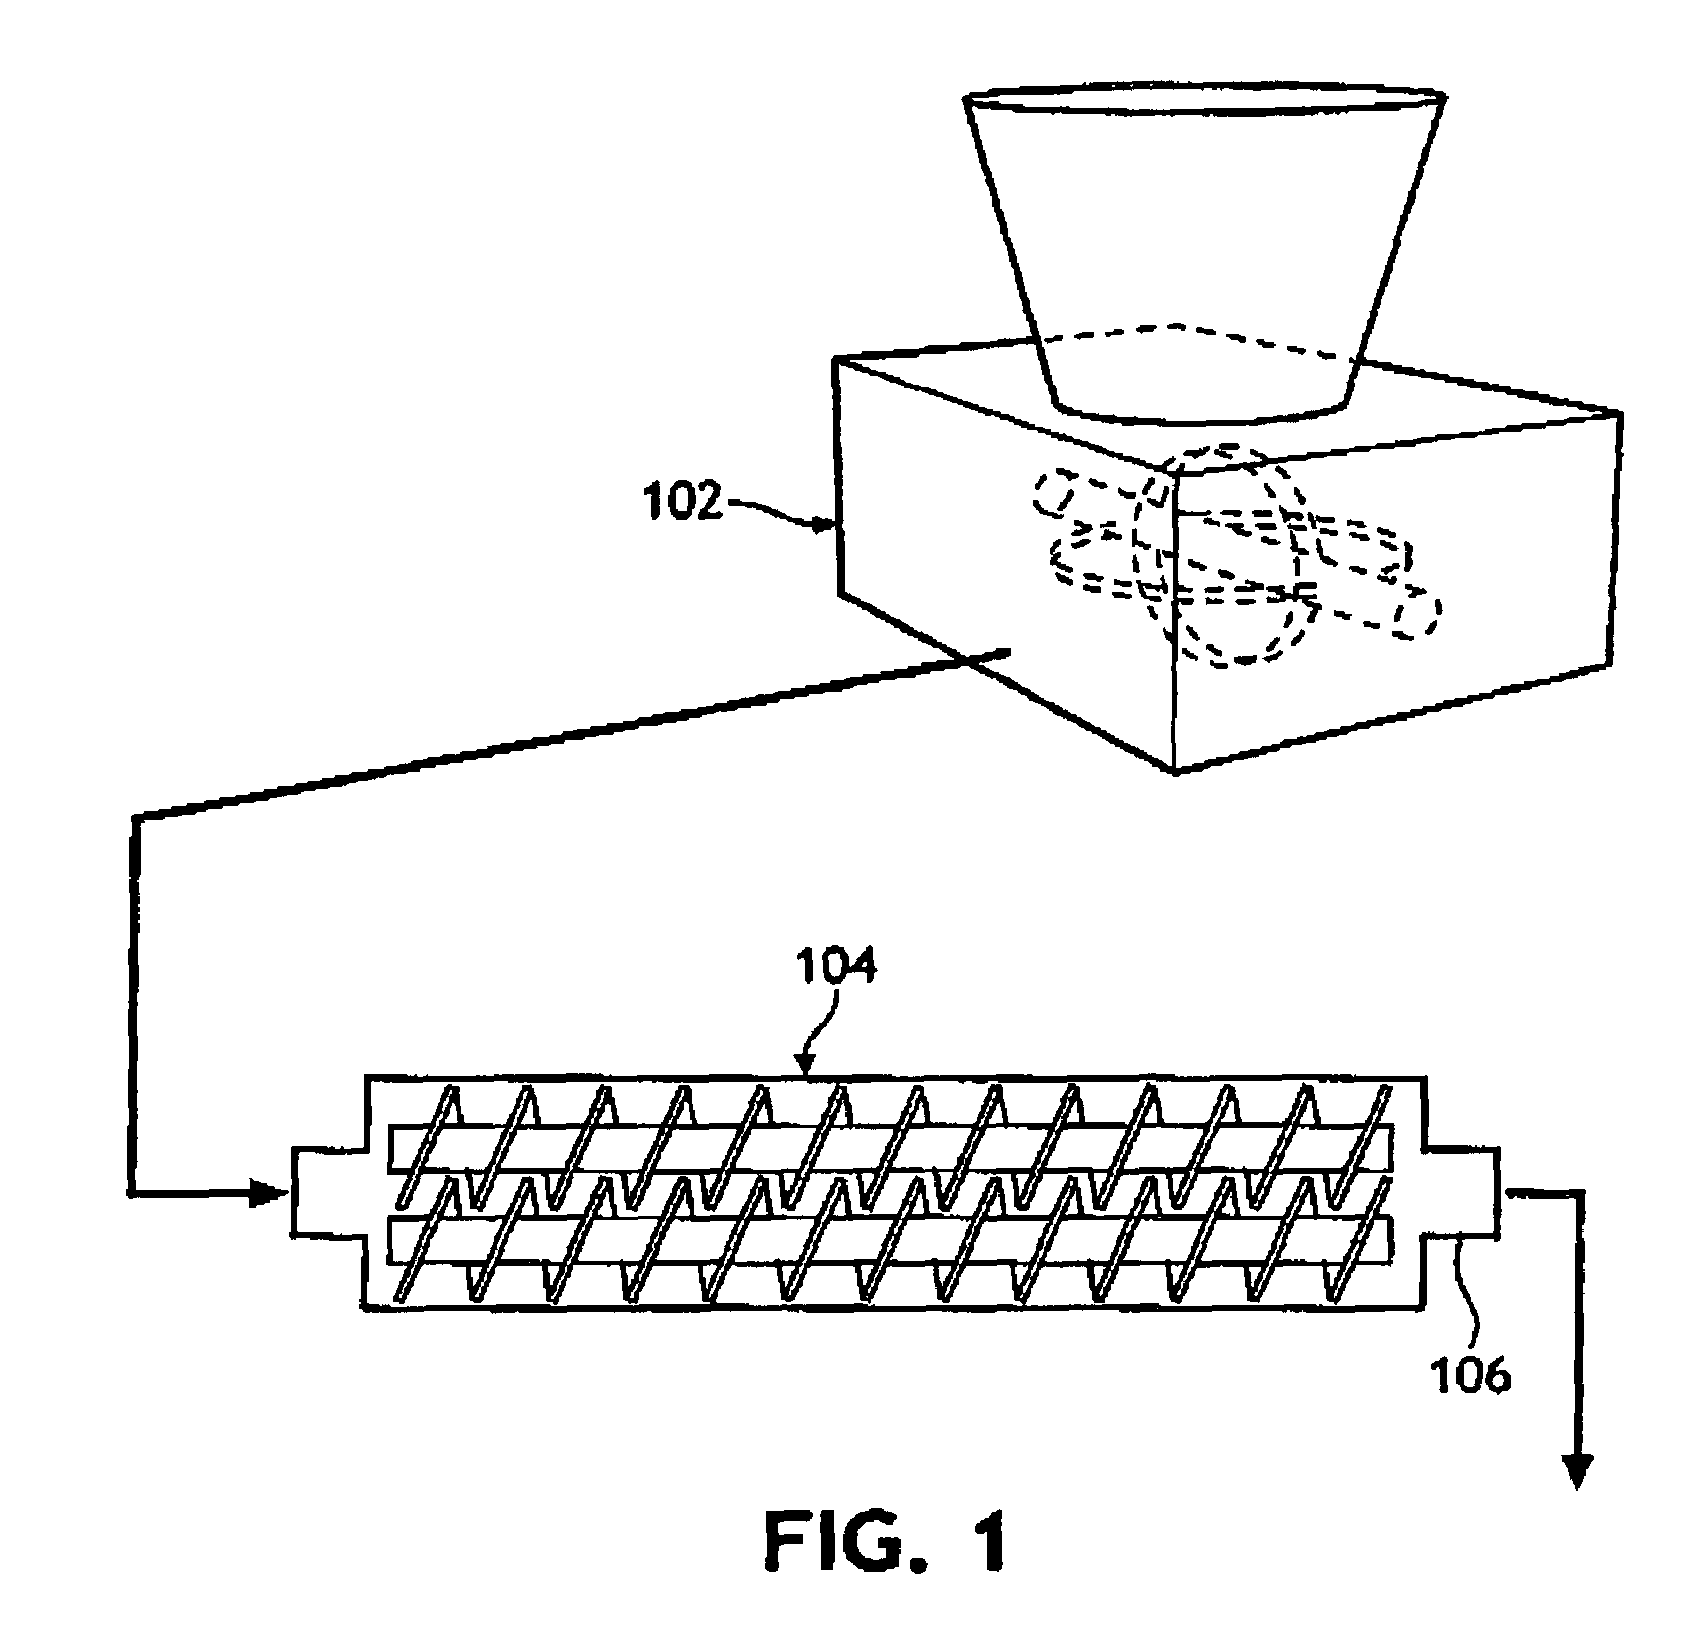 Health-and-hygiene appliance comprising a dispersible component and a releasable component disposed adjacent or proximate to said dispersible component; and processes for making said appliance